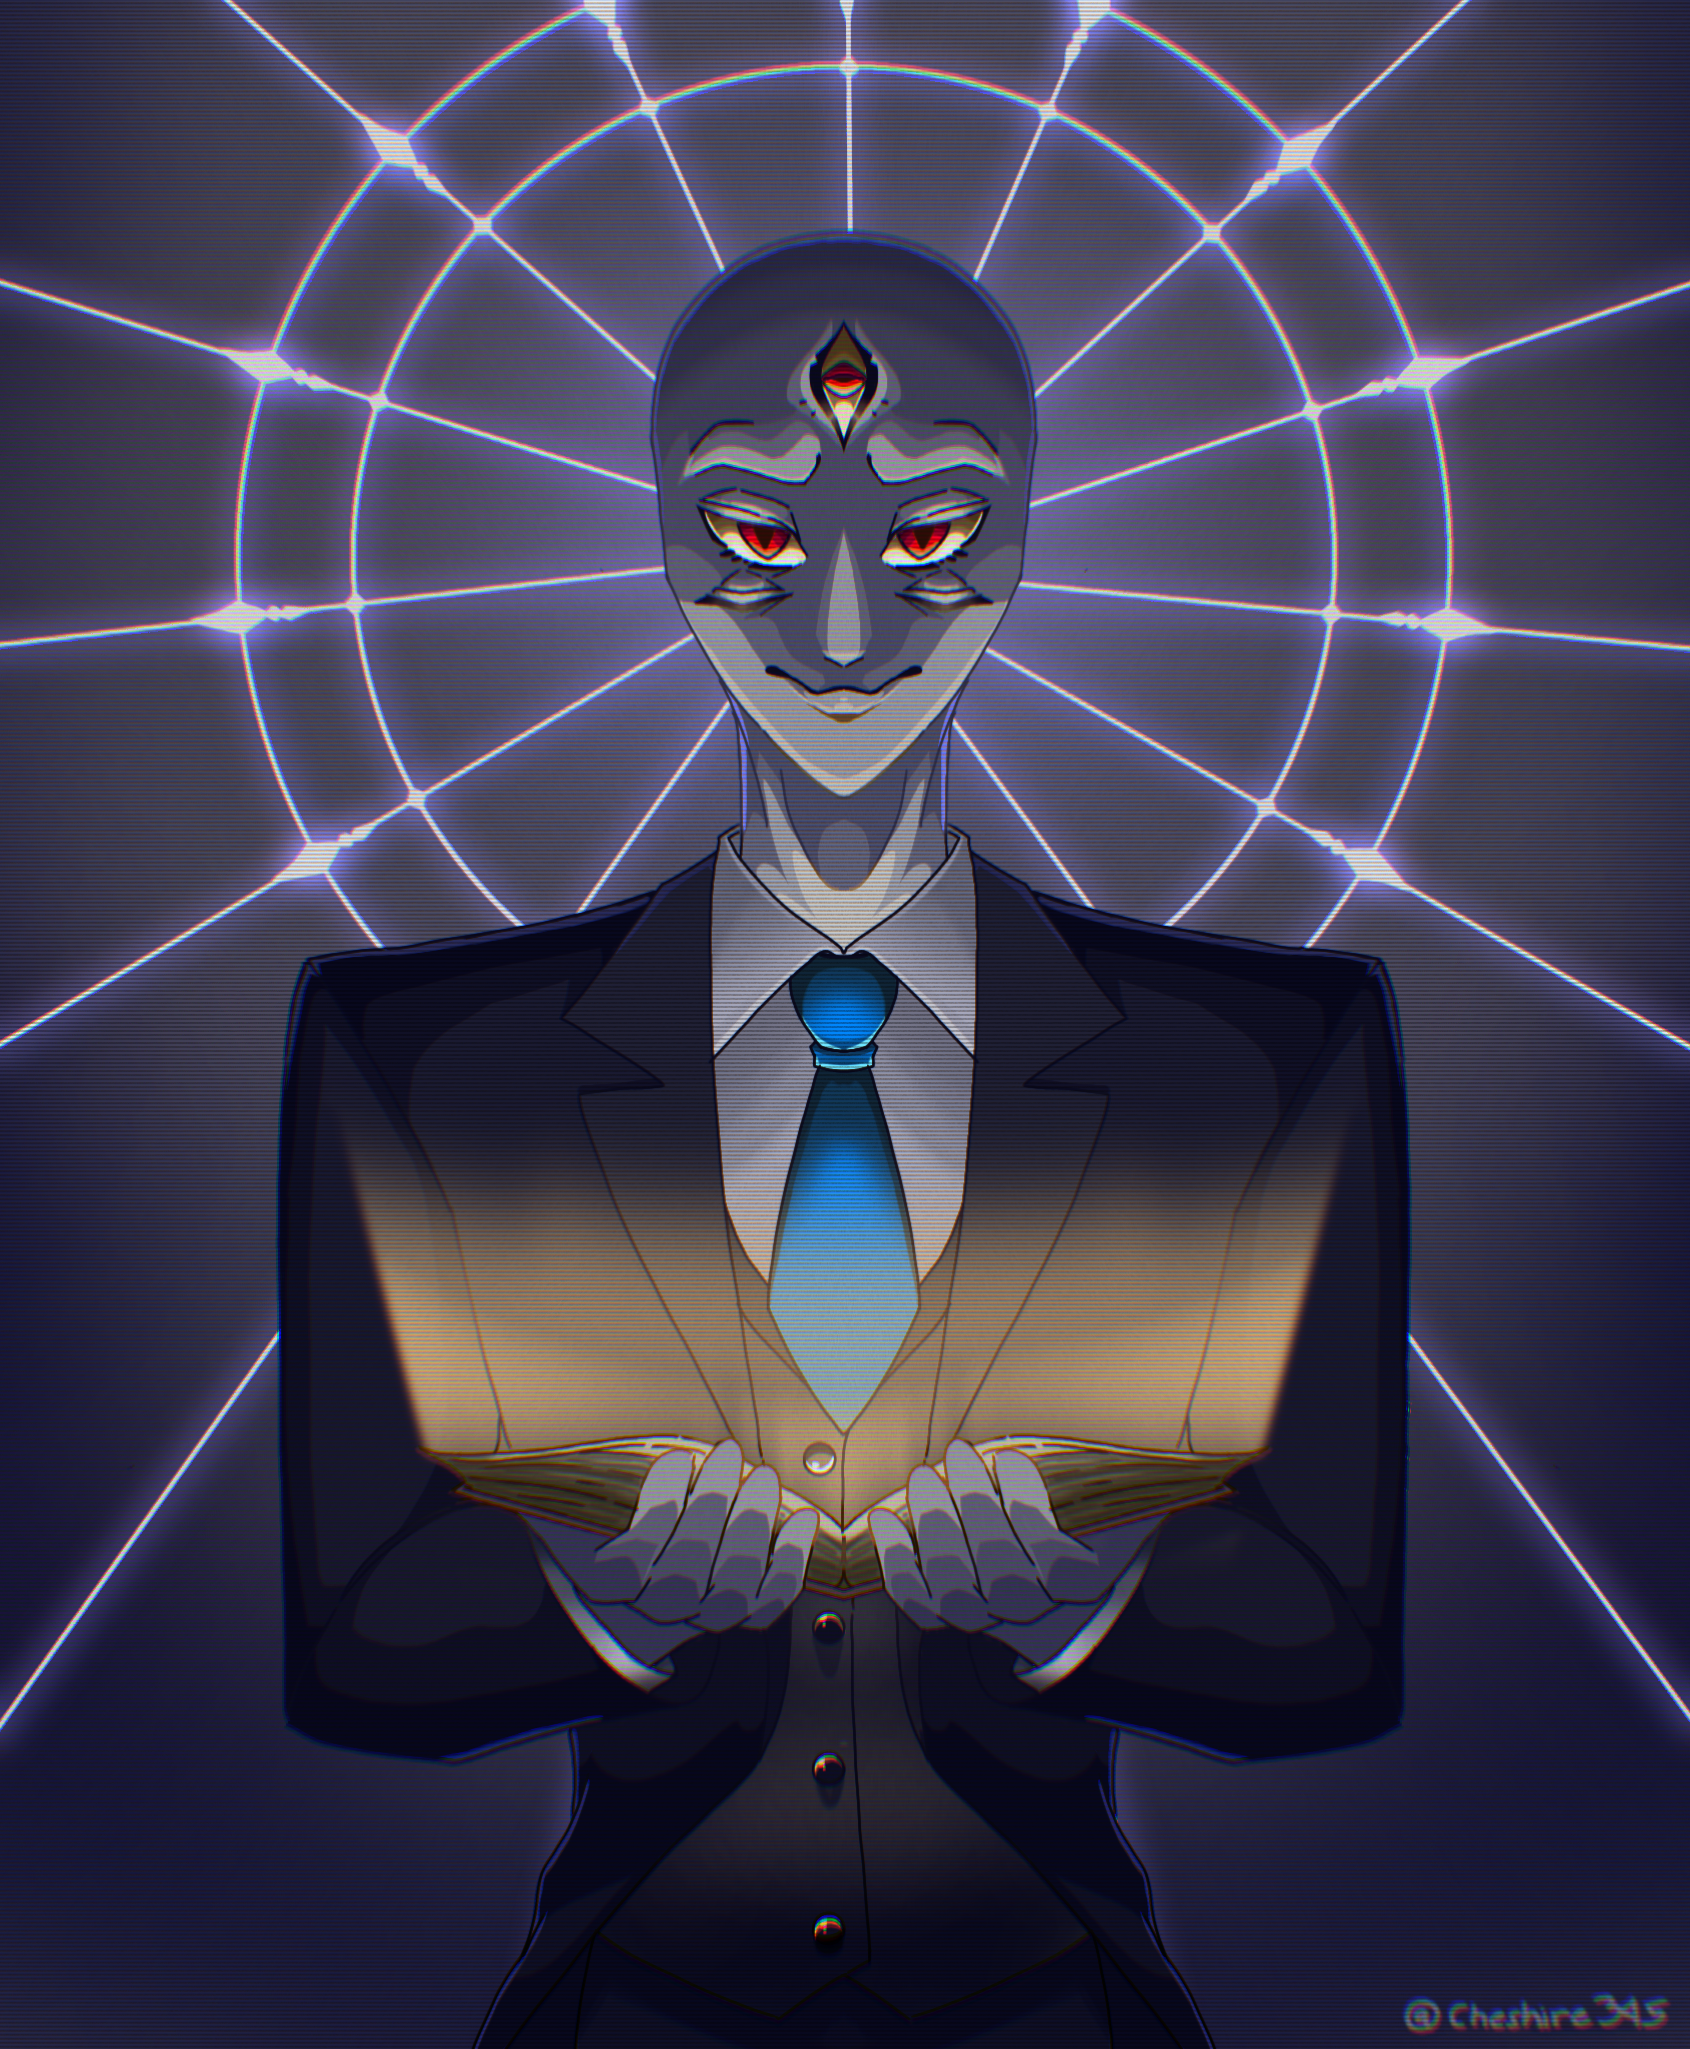 Backrooms Entity 33: The King by Cheshire345 on DeviantArt